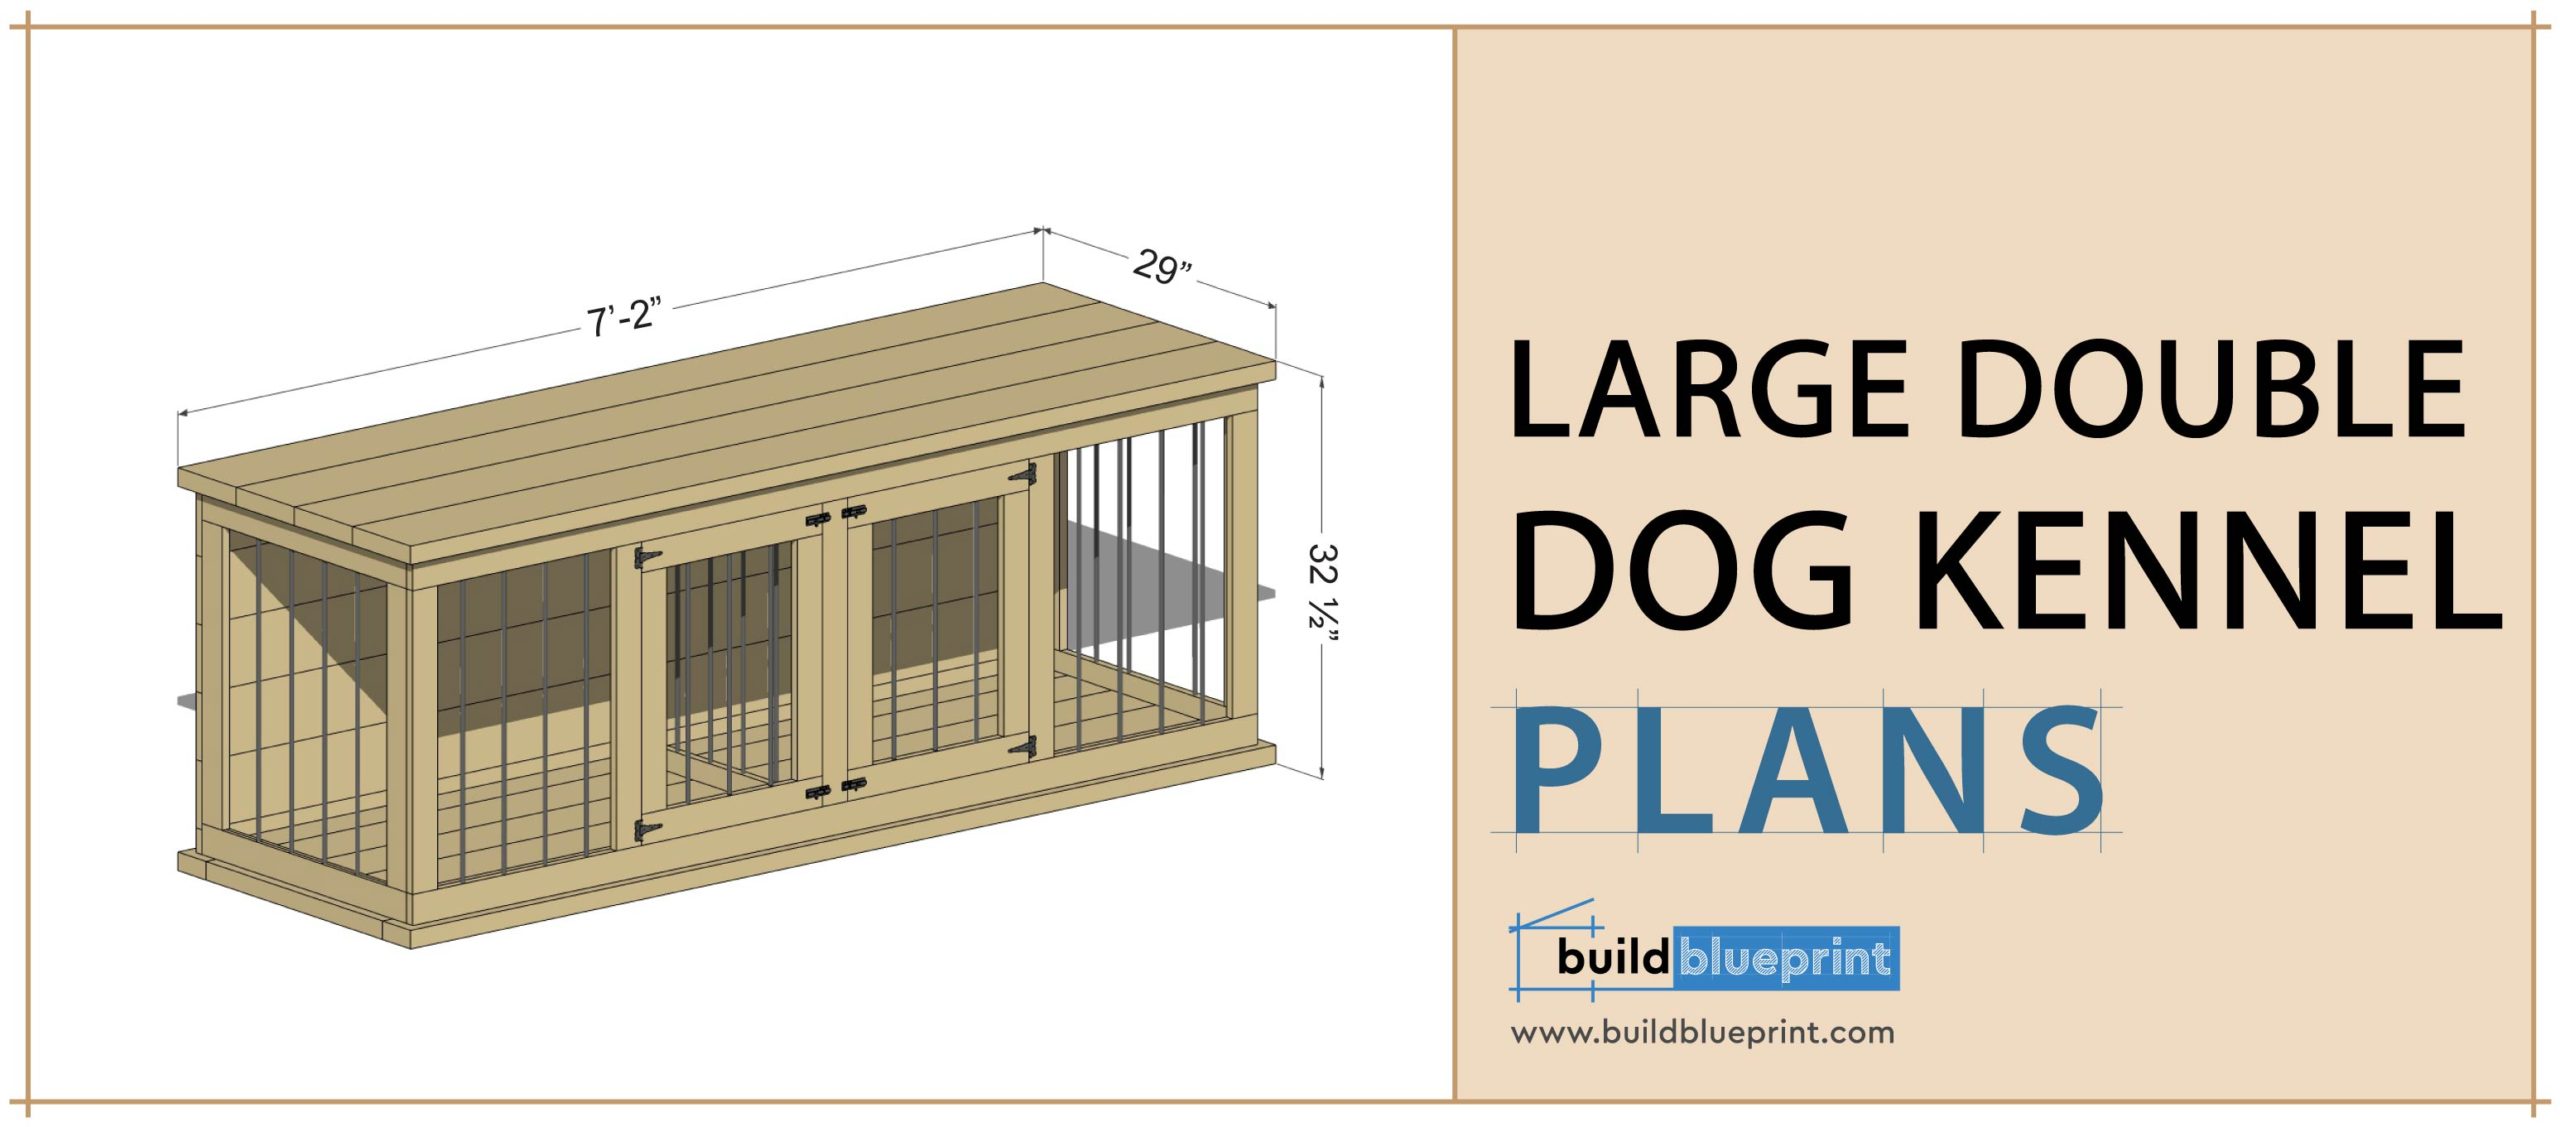 How To Build A Dog Kennel From Scratch Double Dog Kennel DIY Plans - Build Blueprint